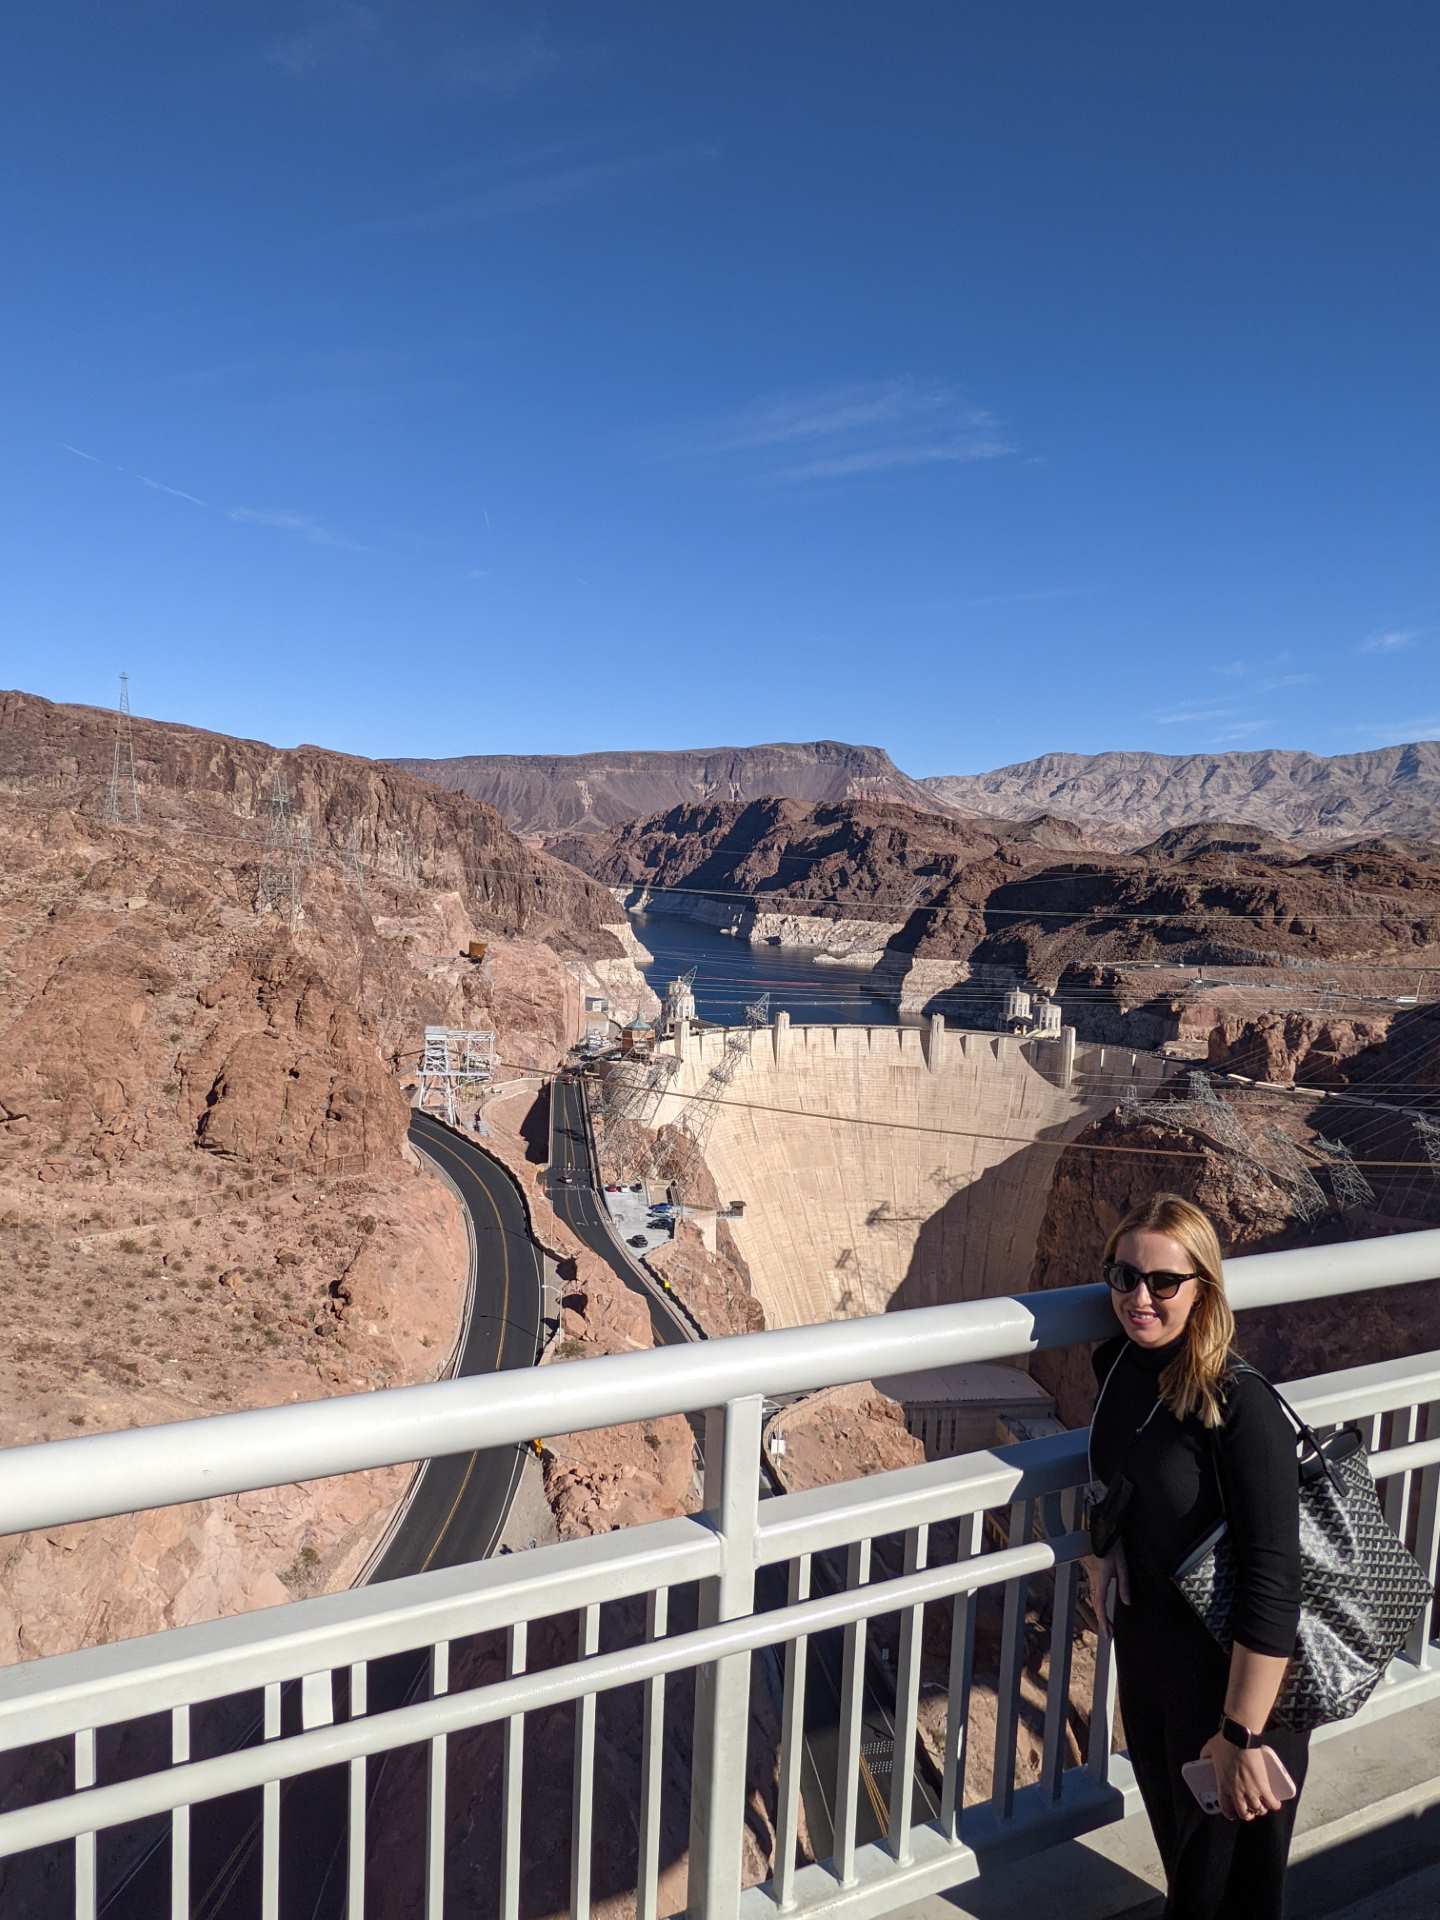 Andrea with the Hoover Dam in the background.